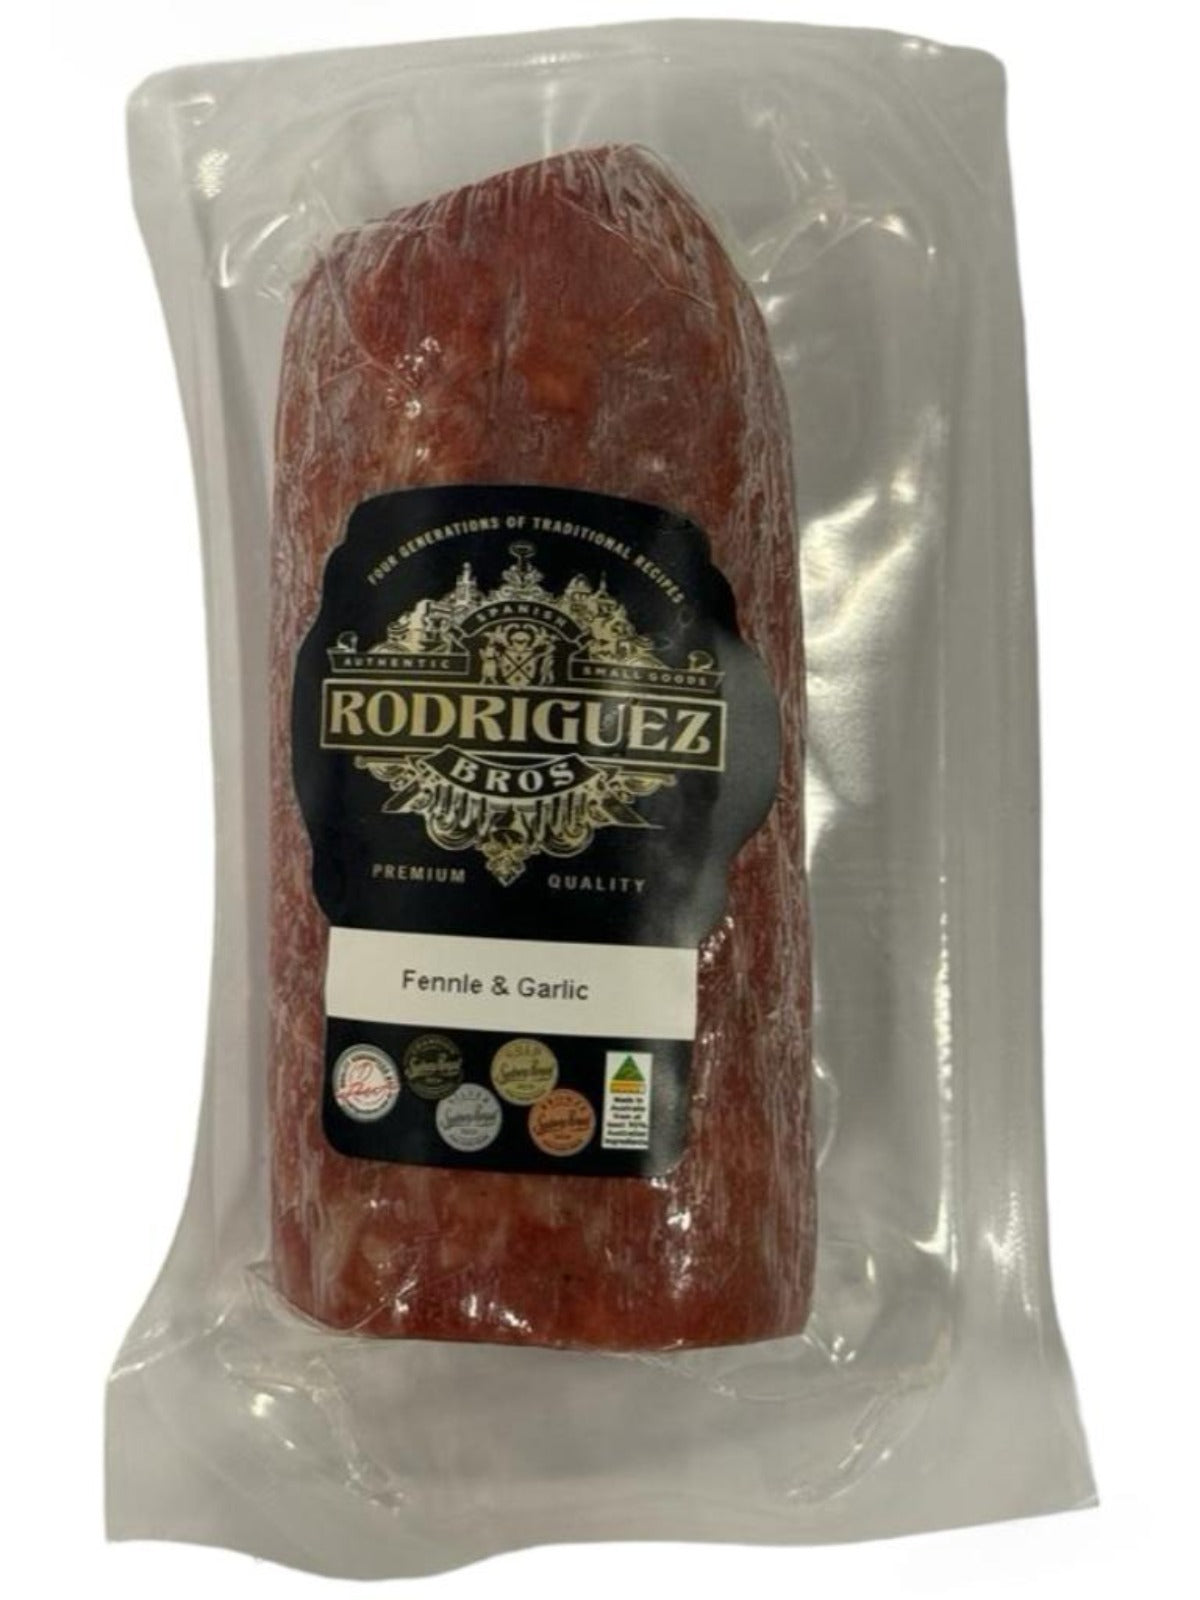 Fennel and Garlic Salchichon Half Salami Approx 320g random weight packet. Regular price $8.00 AUD [You are guaranteed to receive at least 300g of product, equivalent price of $33.33 per kg.]